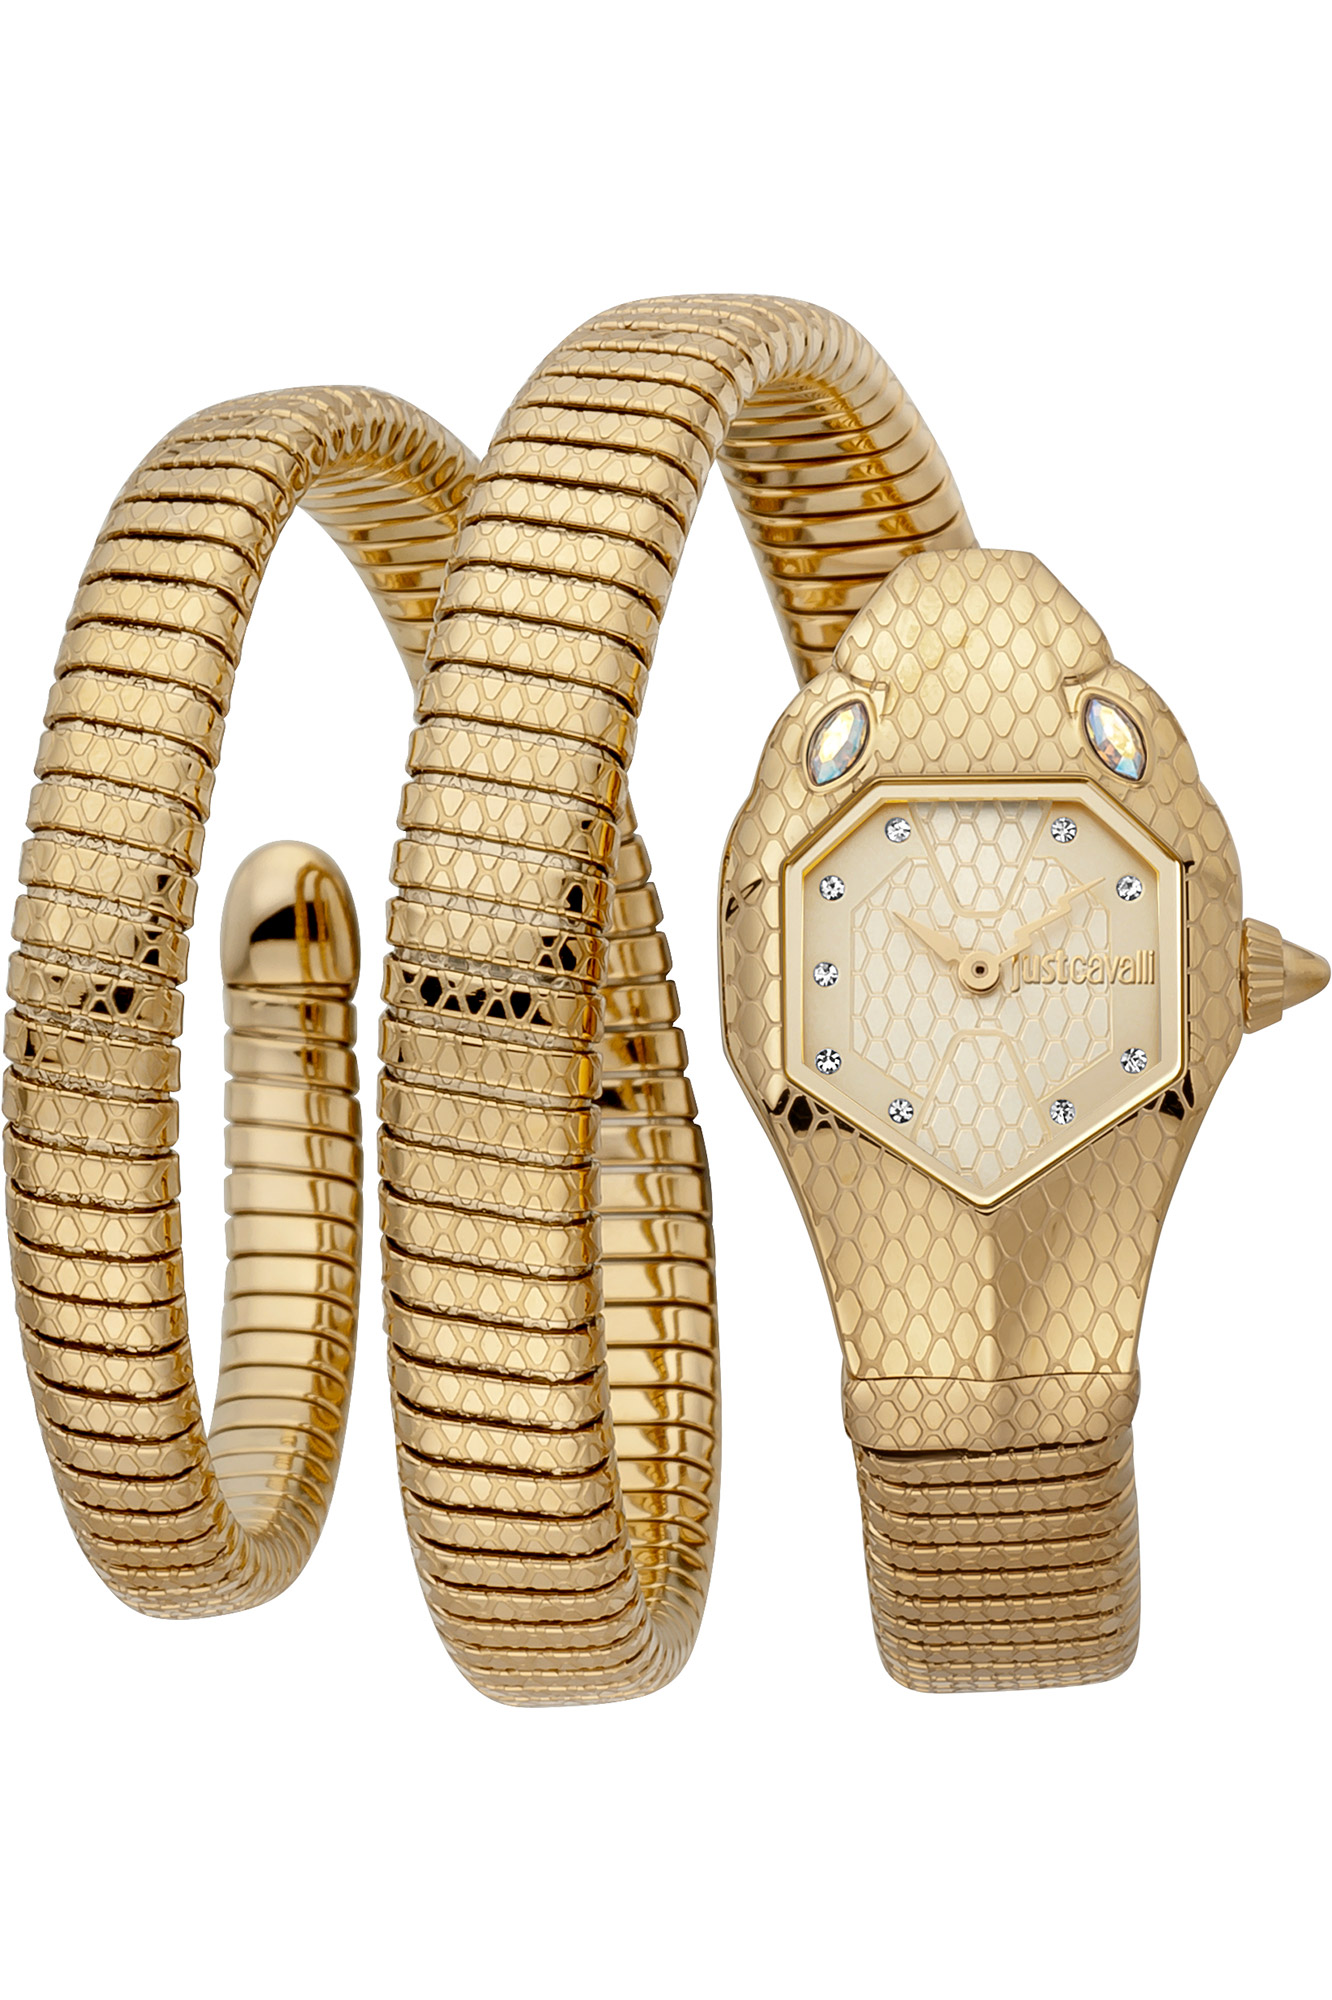 Authentic! Bulgari 18k Yellow Gold Tubogas Serpent Snake Bracelet Watch |  Fortrove